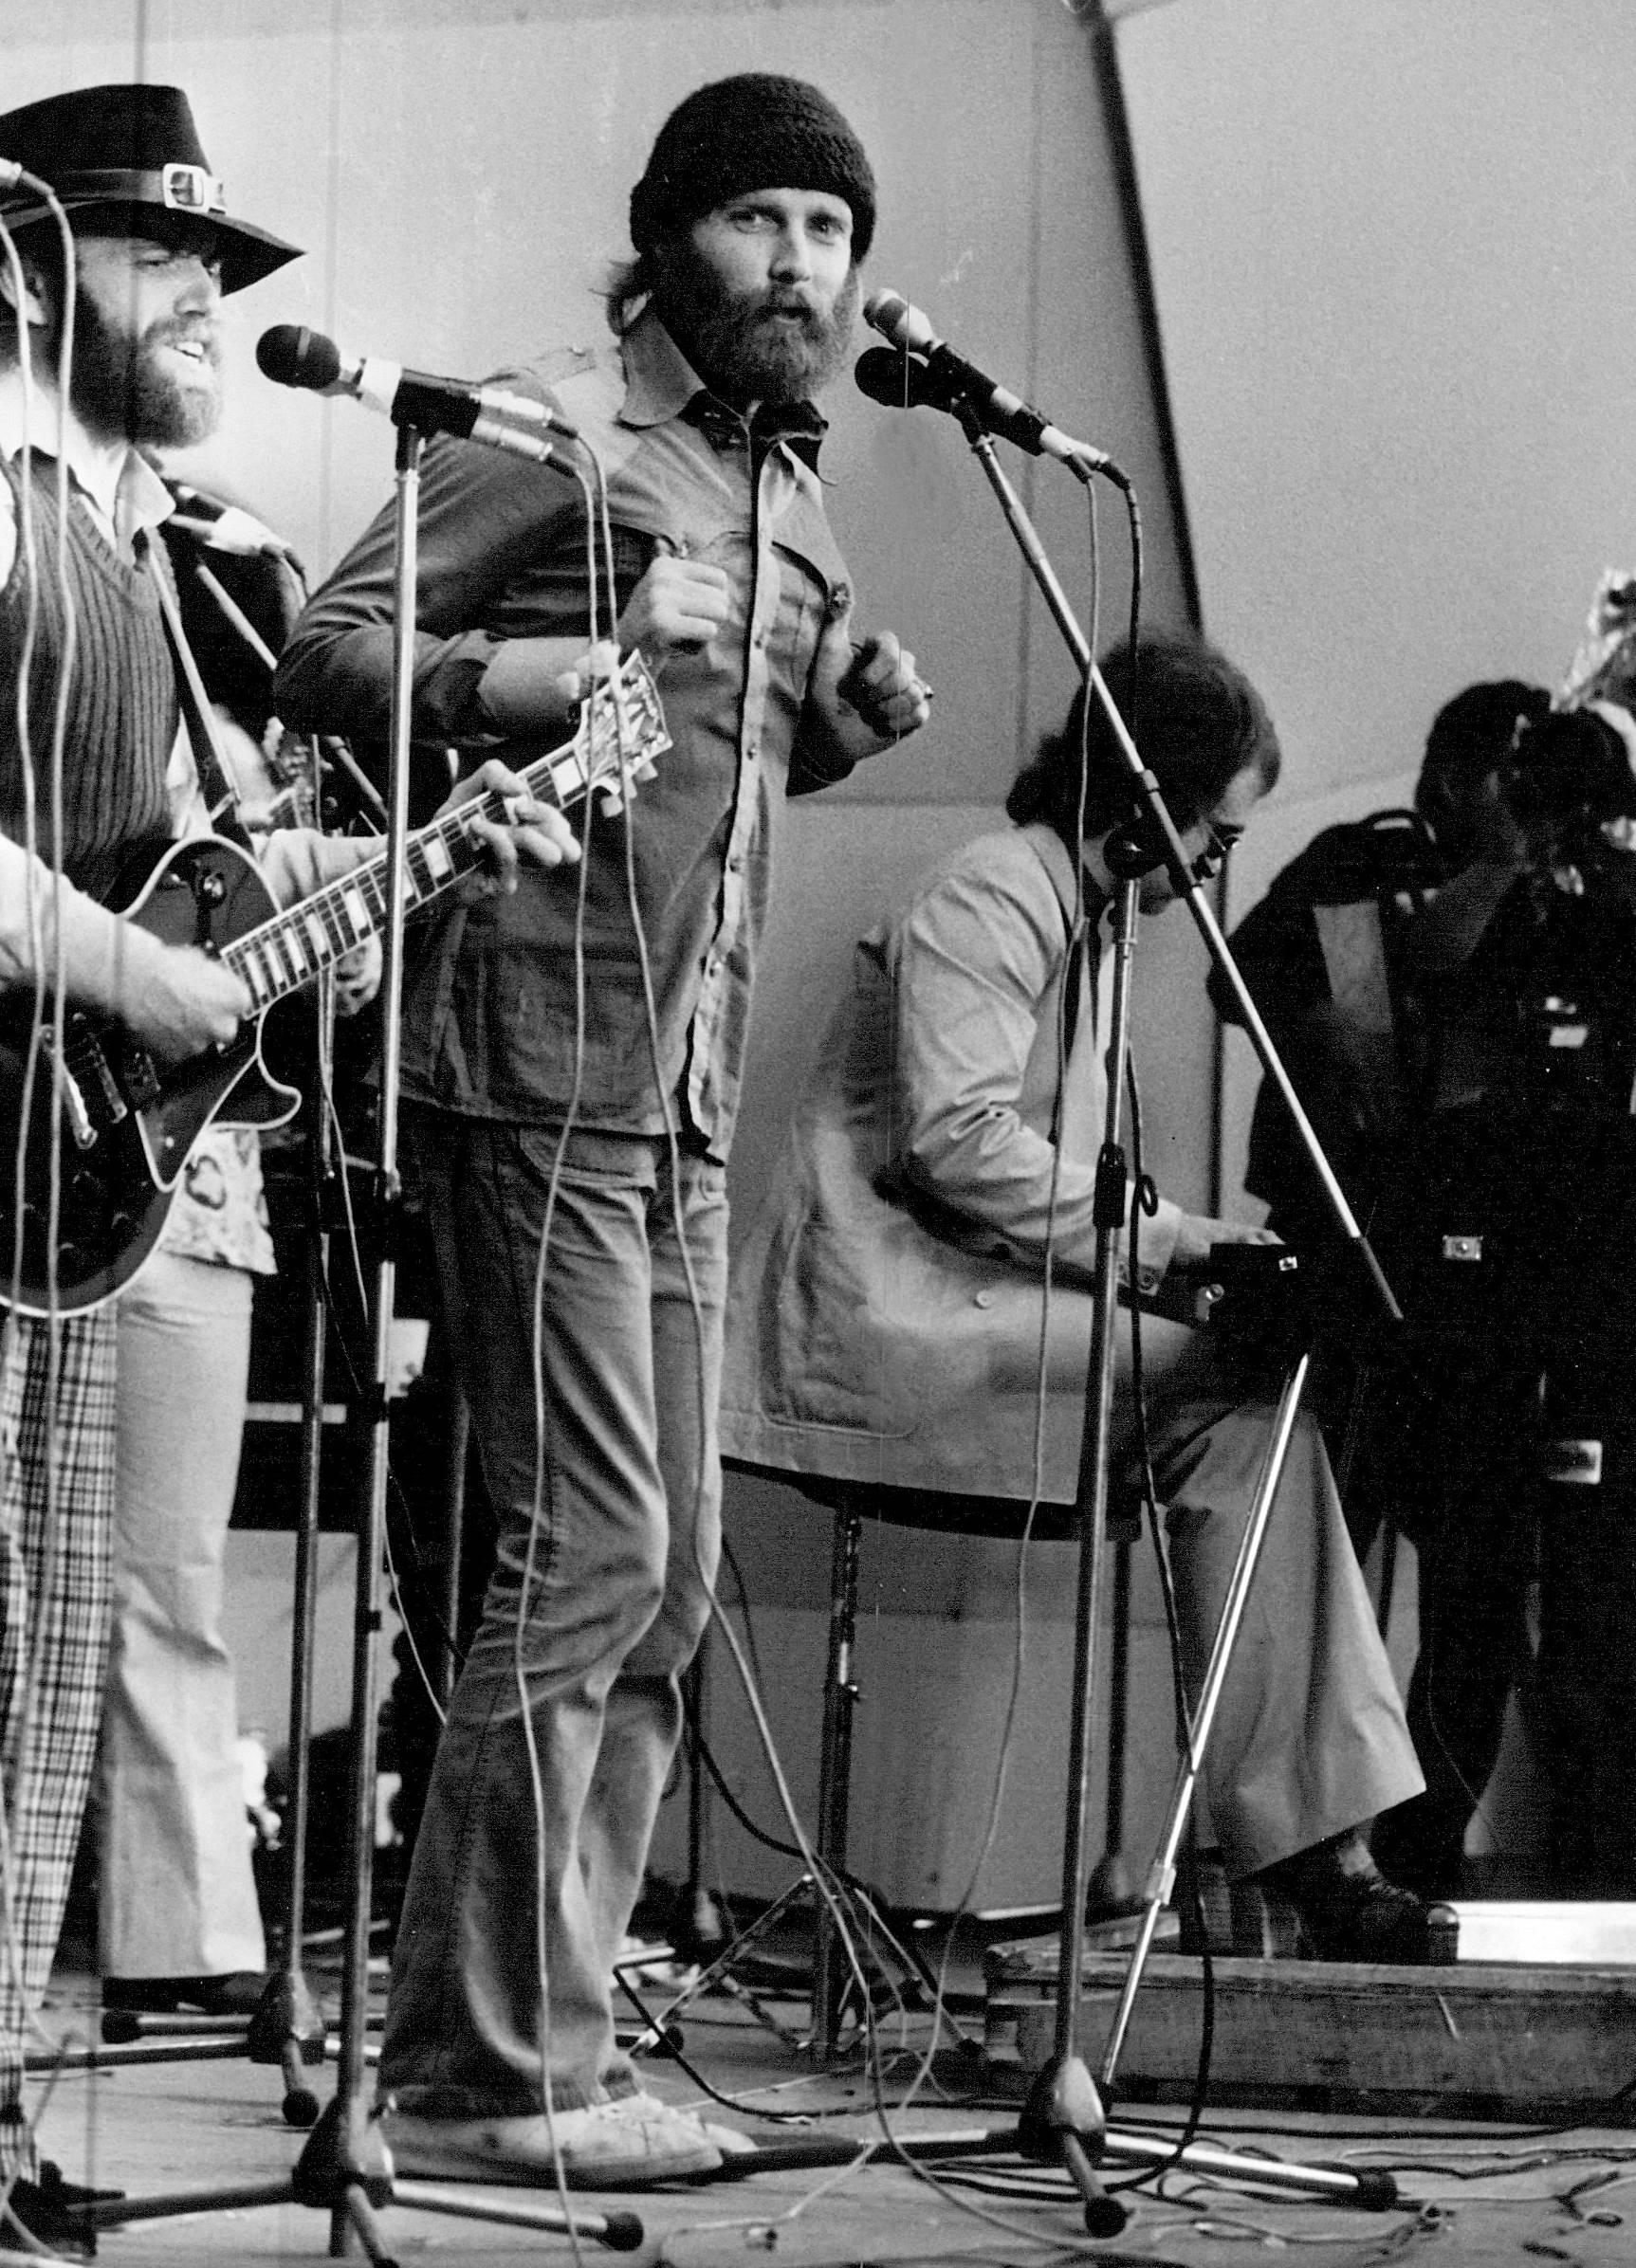 Unknown Black and White Photograph - The Beach Boys with Elton John on Stage Vintage Original Photograph